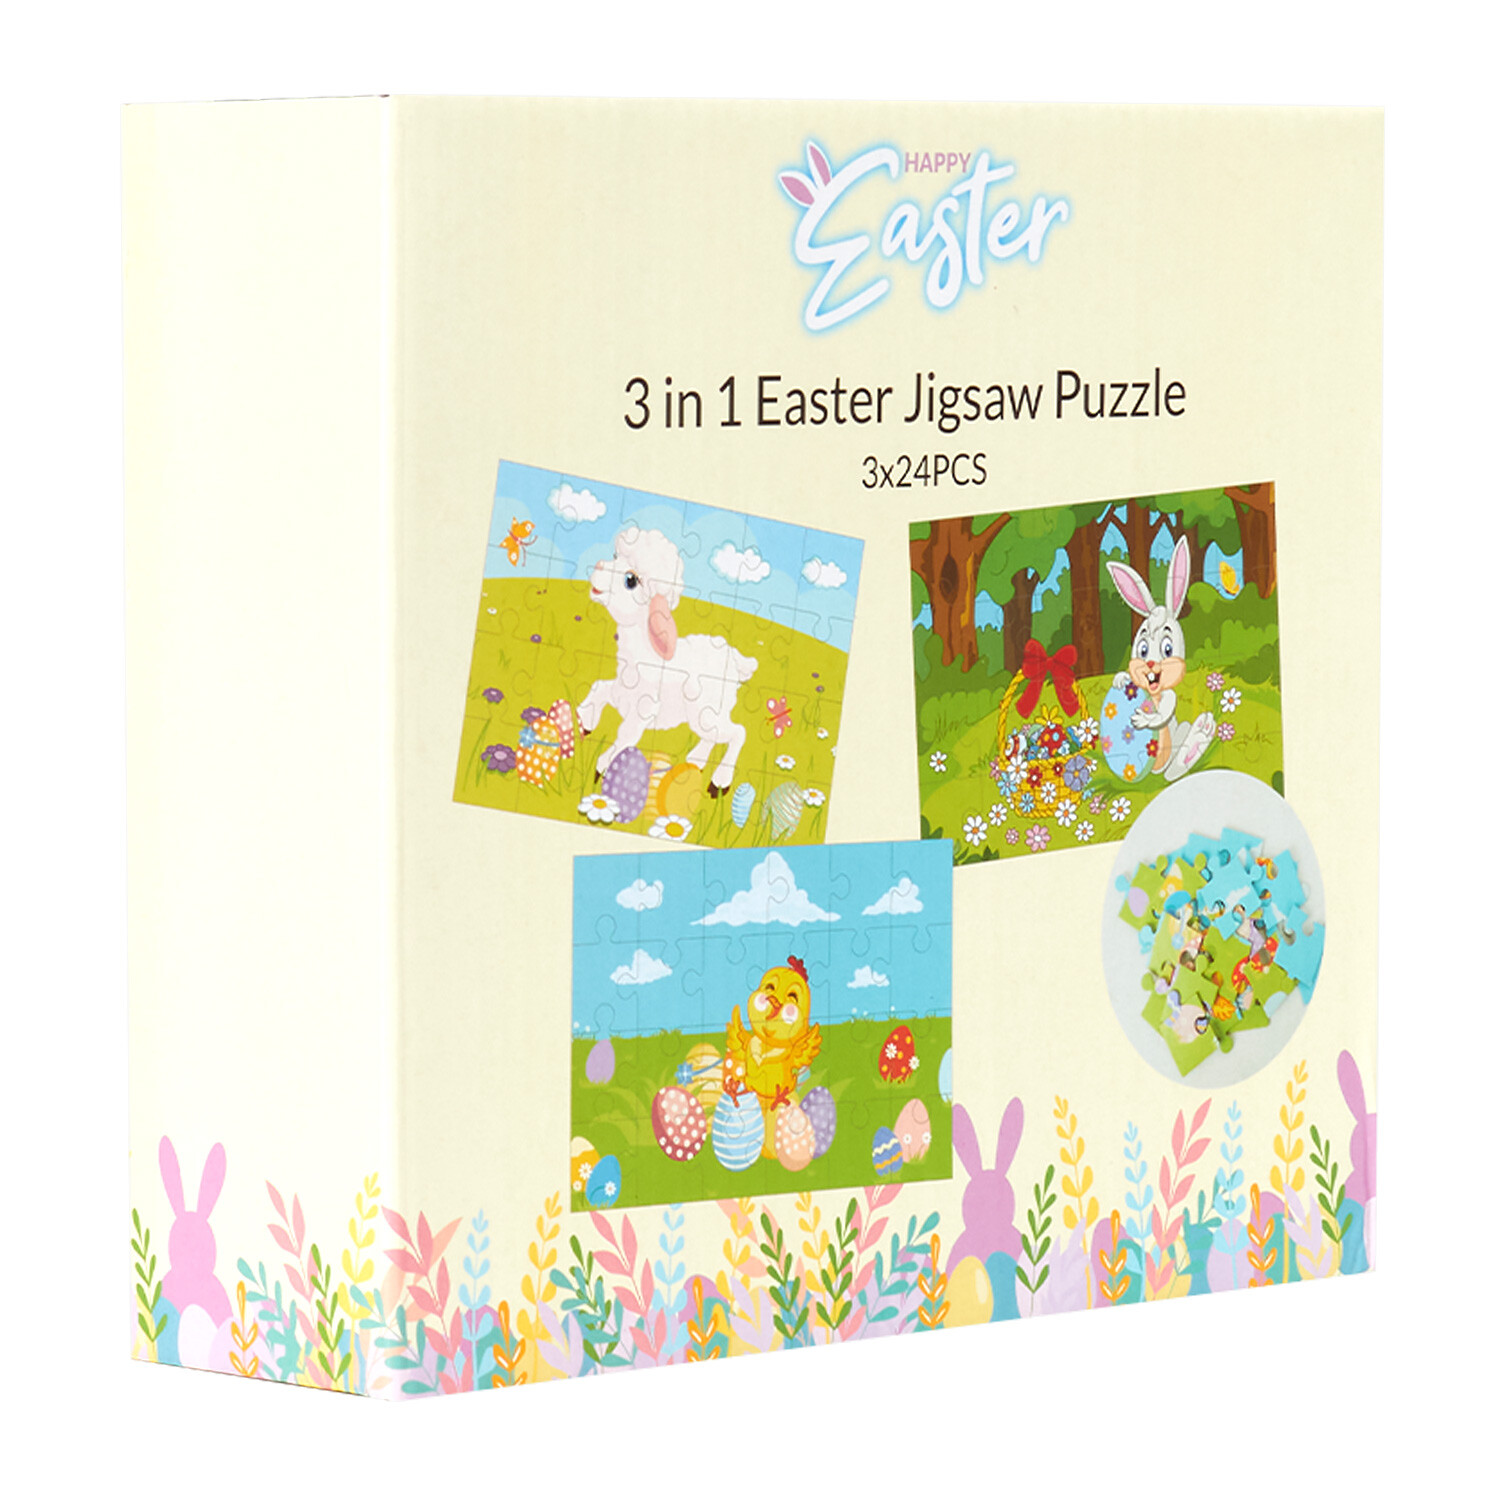 3-in-1 Easter Jigsaw Puzzle Image 2